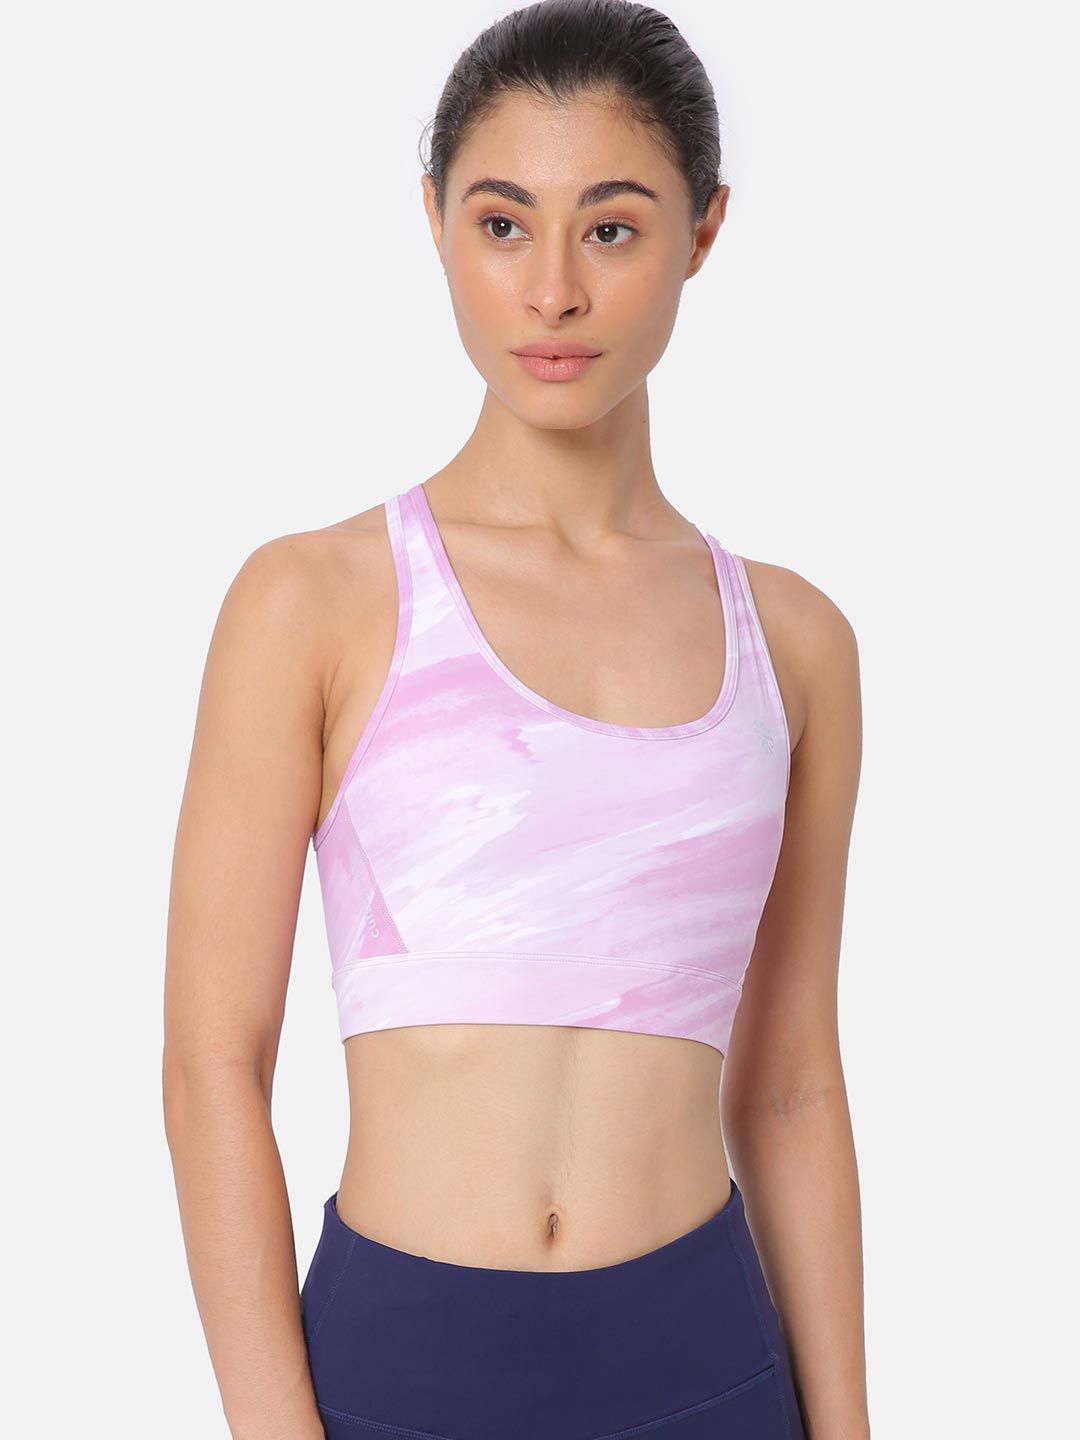 Cultsport Pink Abstract Workout Bra - Full Coverage Lightly Padded Price in India